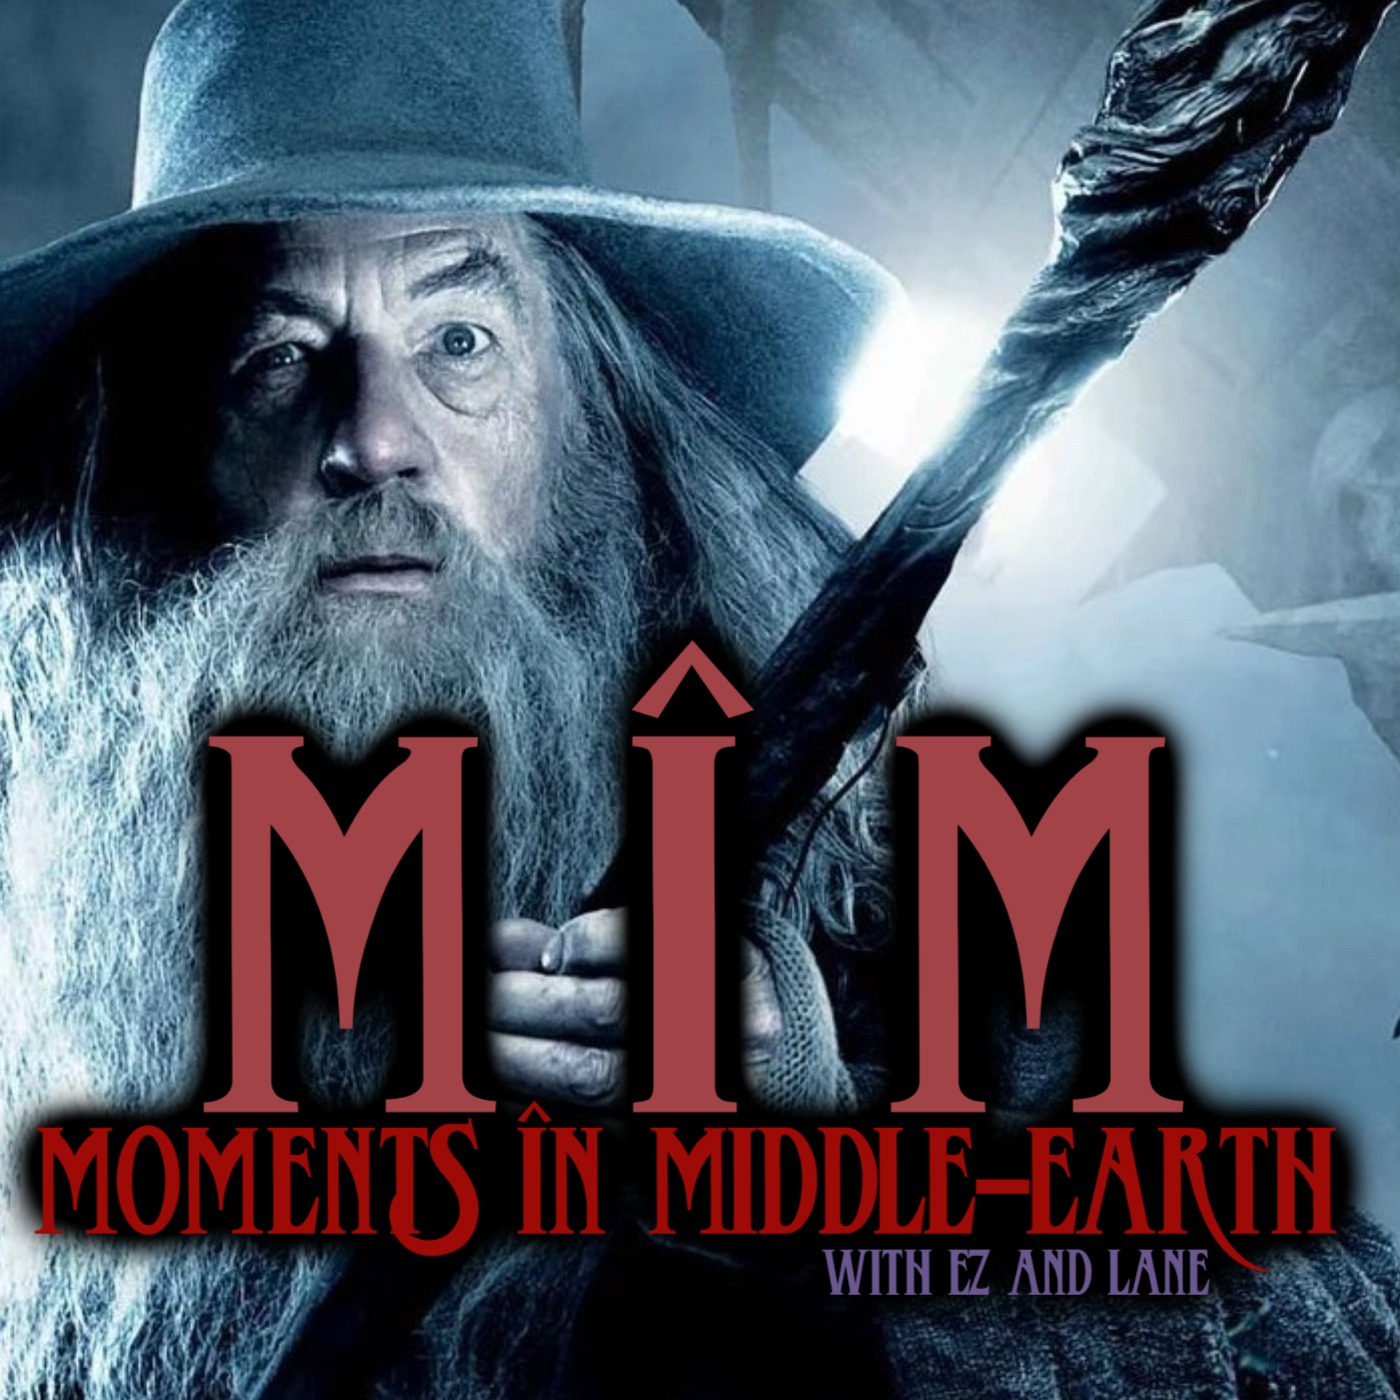 Moments in Middle Earth - Ep 3 - Gandalf’s Council